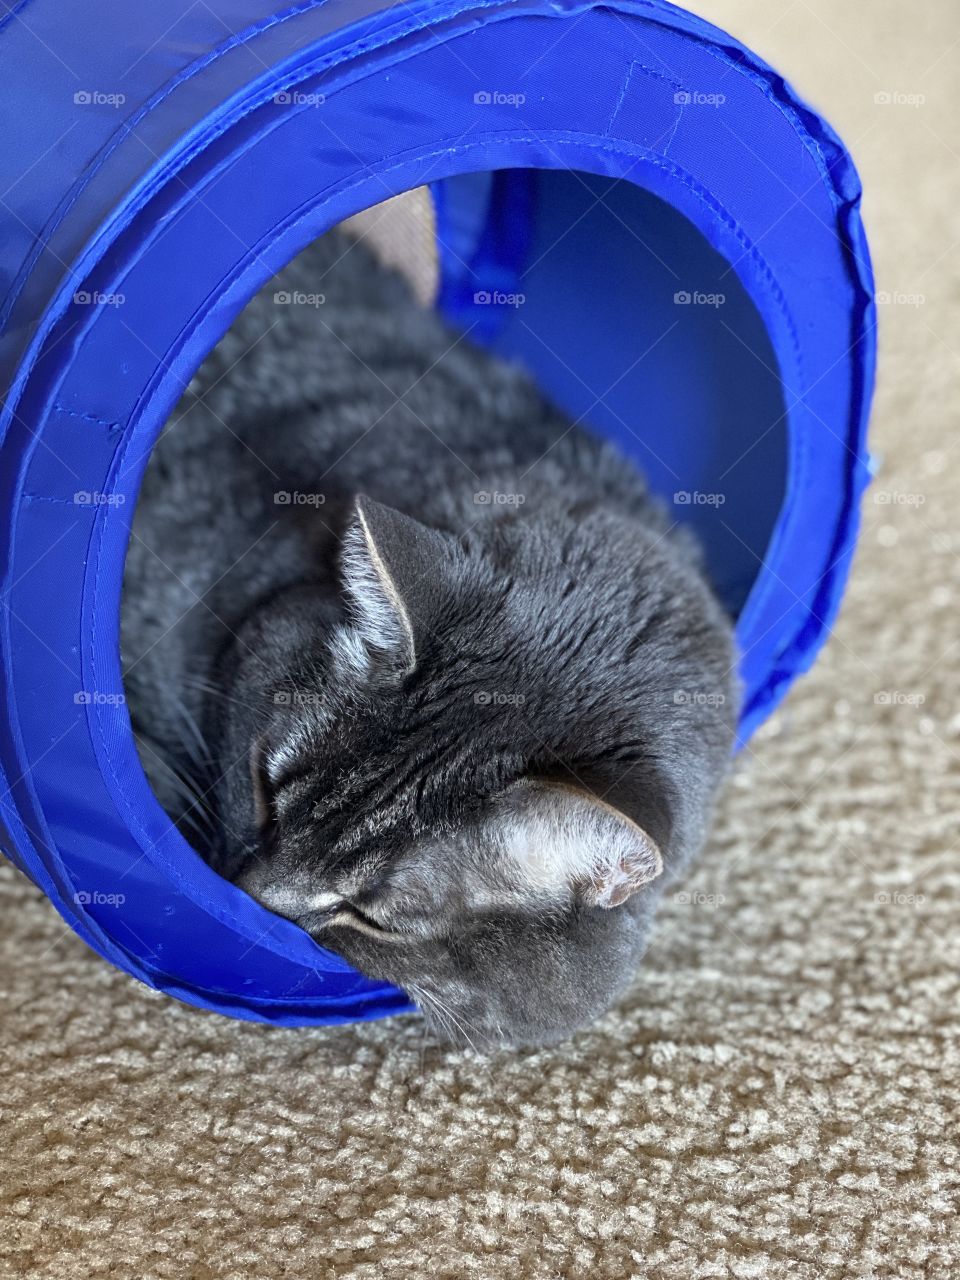 Our cat Phoenix taking a nap in his blue tube in the late afternoon after playing hard